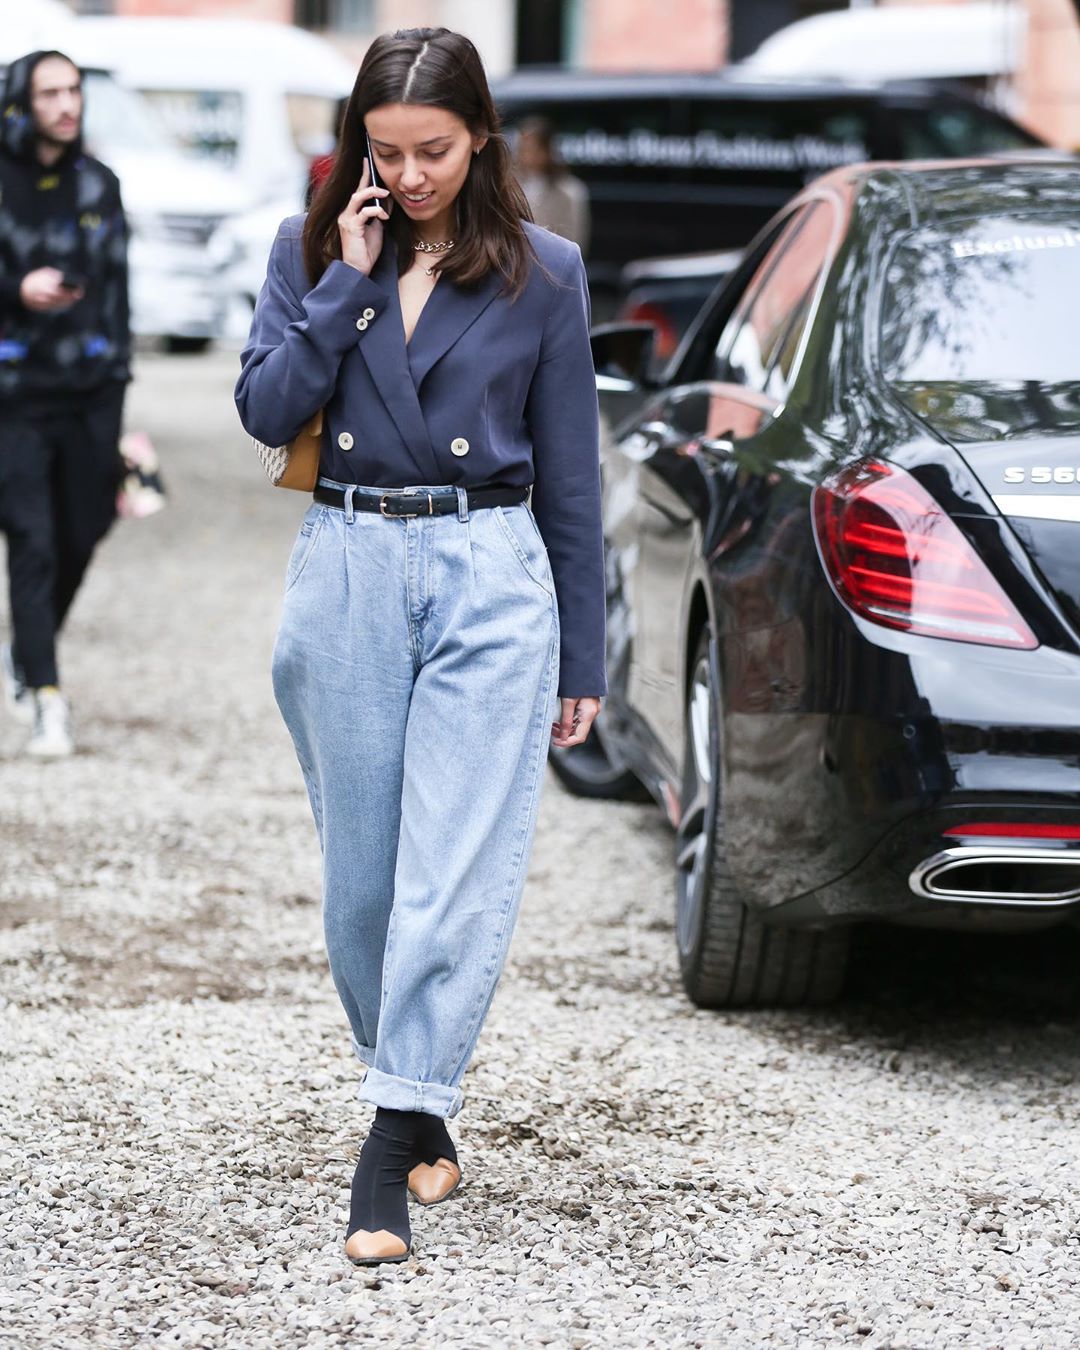 High-Waisted Mom Jeans are Still Having a Fashion Moment